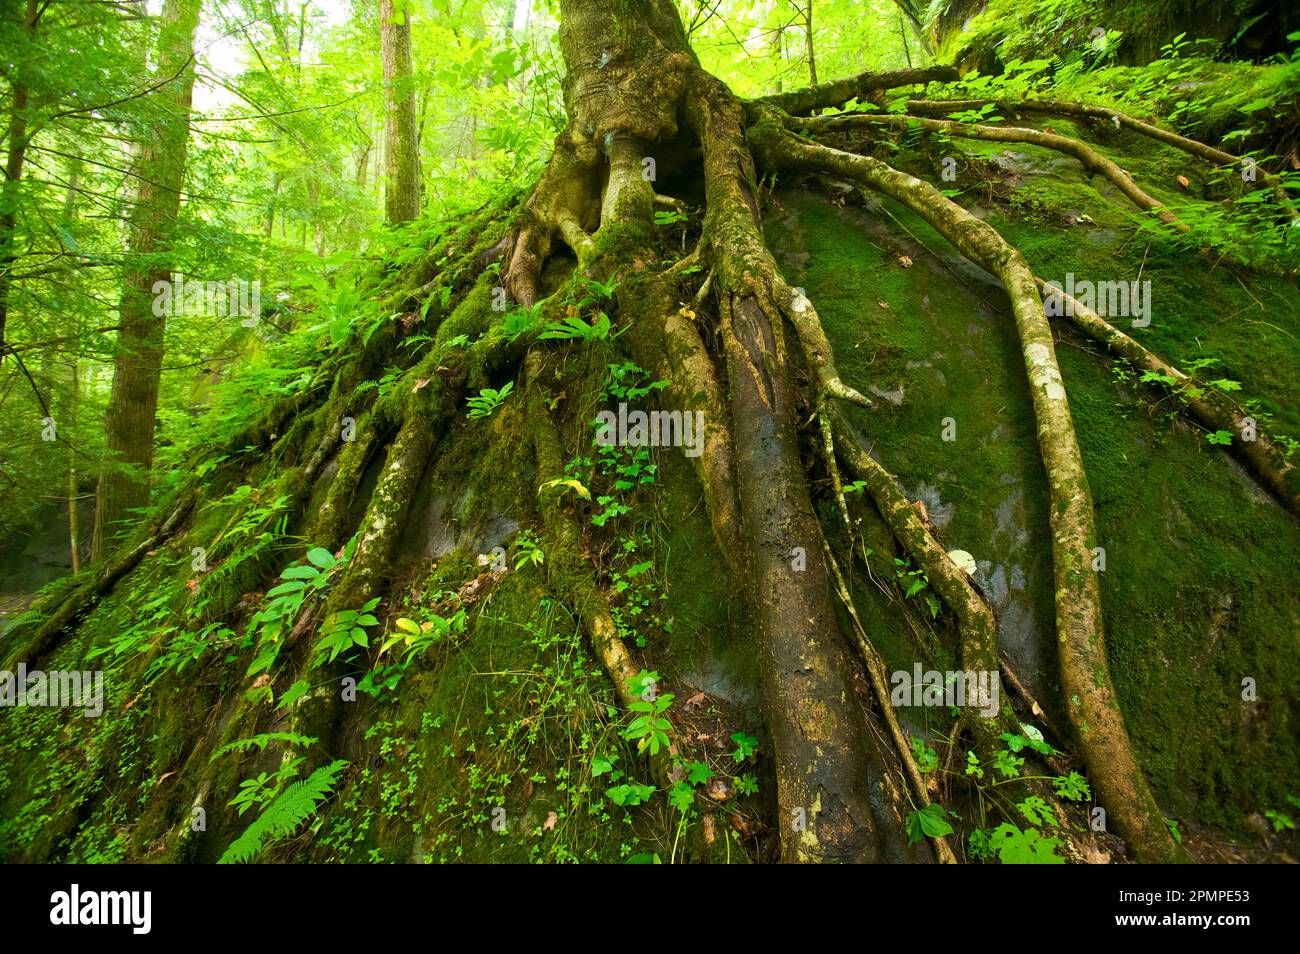 Tree roots gripping a moss-covered boulder in a forest in Great Smoky Mountains National Park, Tennessee, USA; Tennessee, United States of America Stock Photo